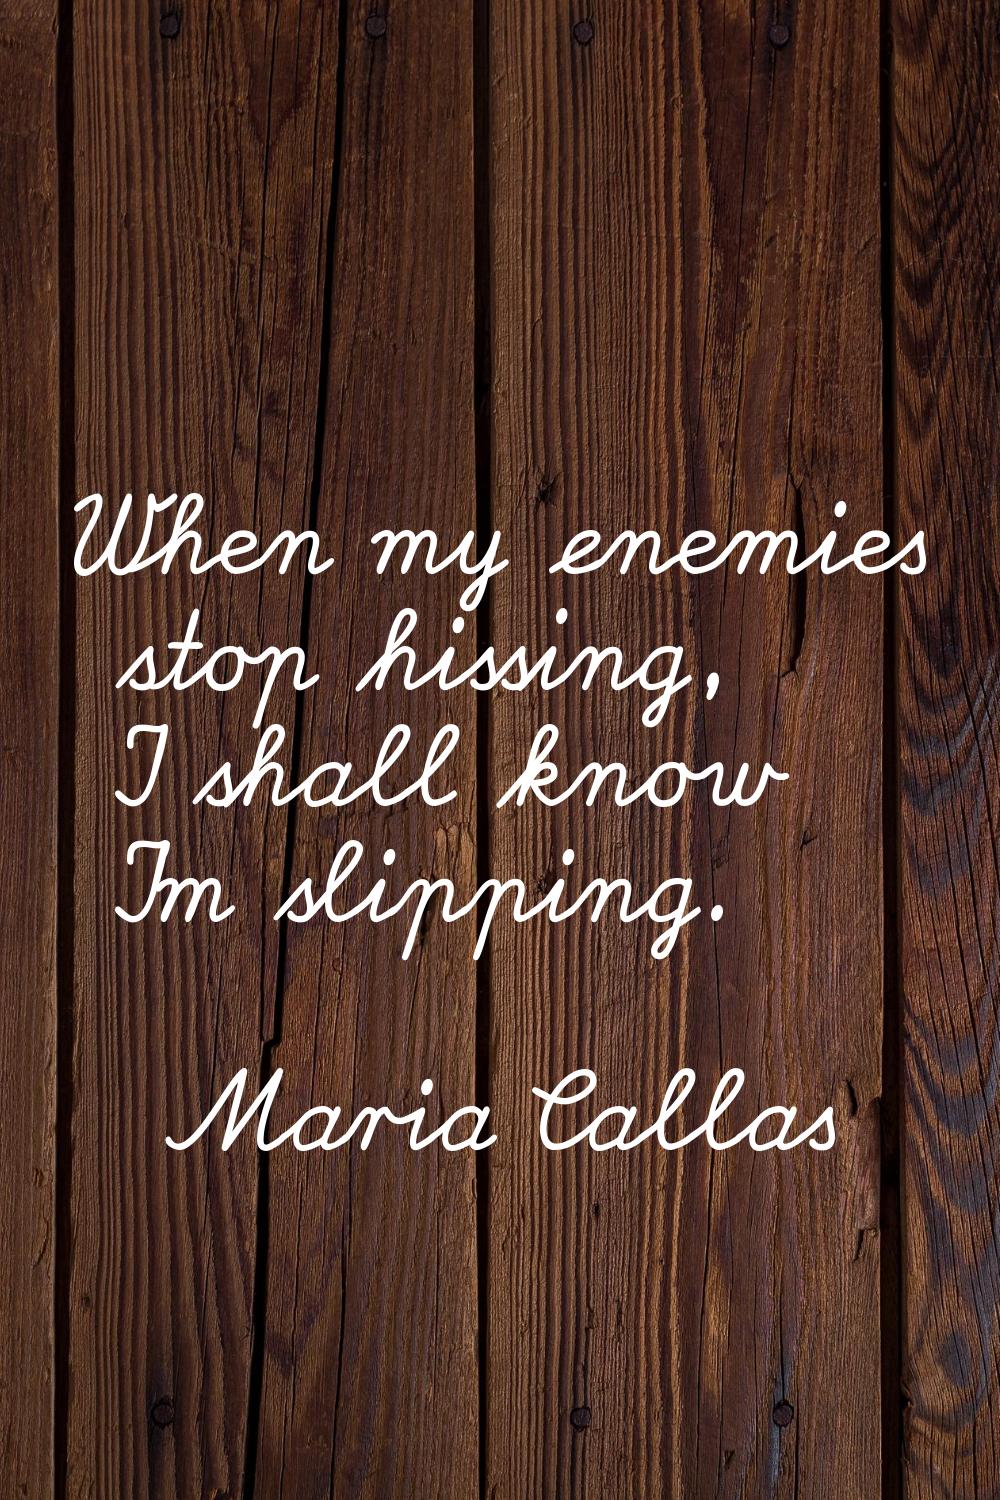 When my enemies stop hissing, I shall know I'm slipping.